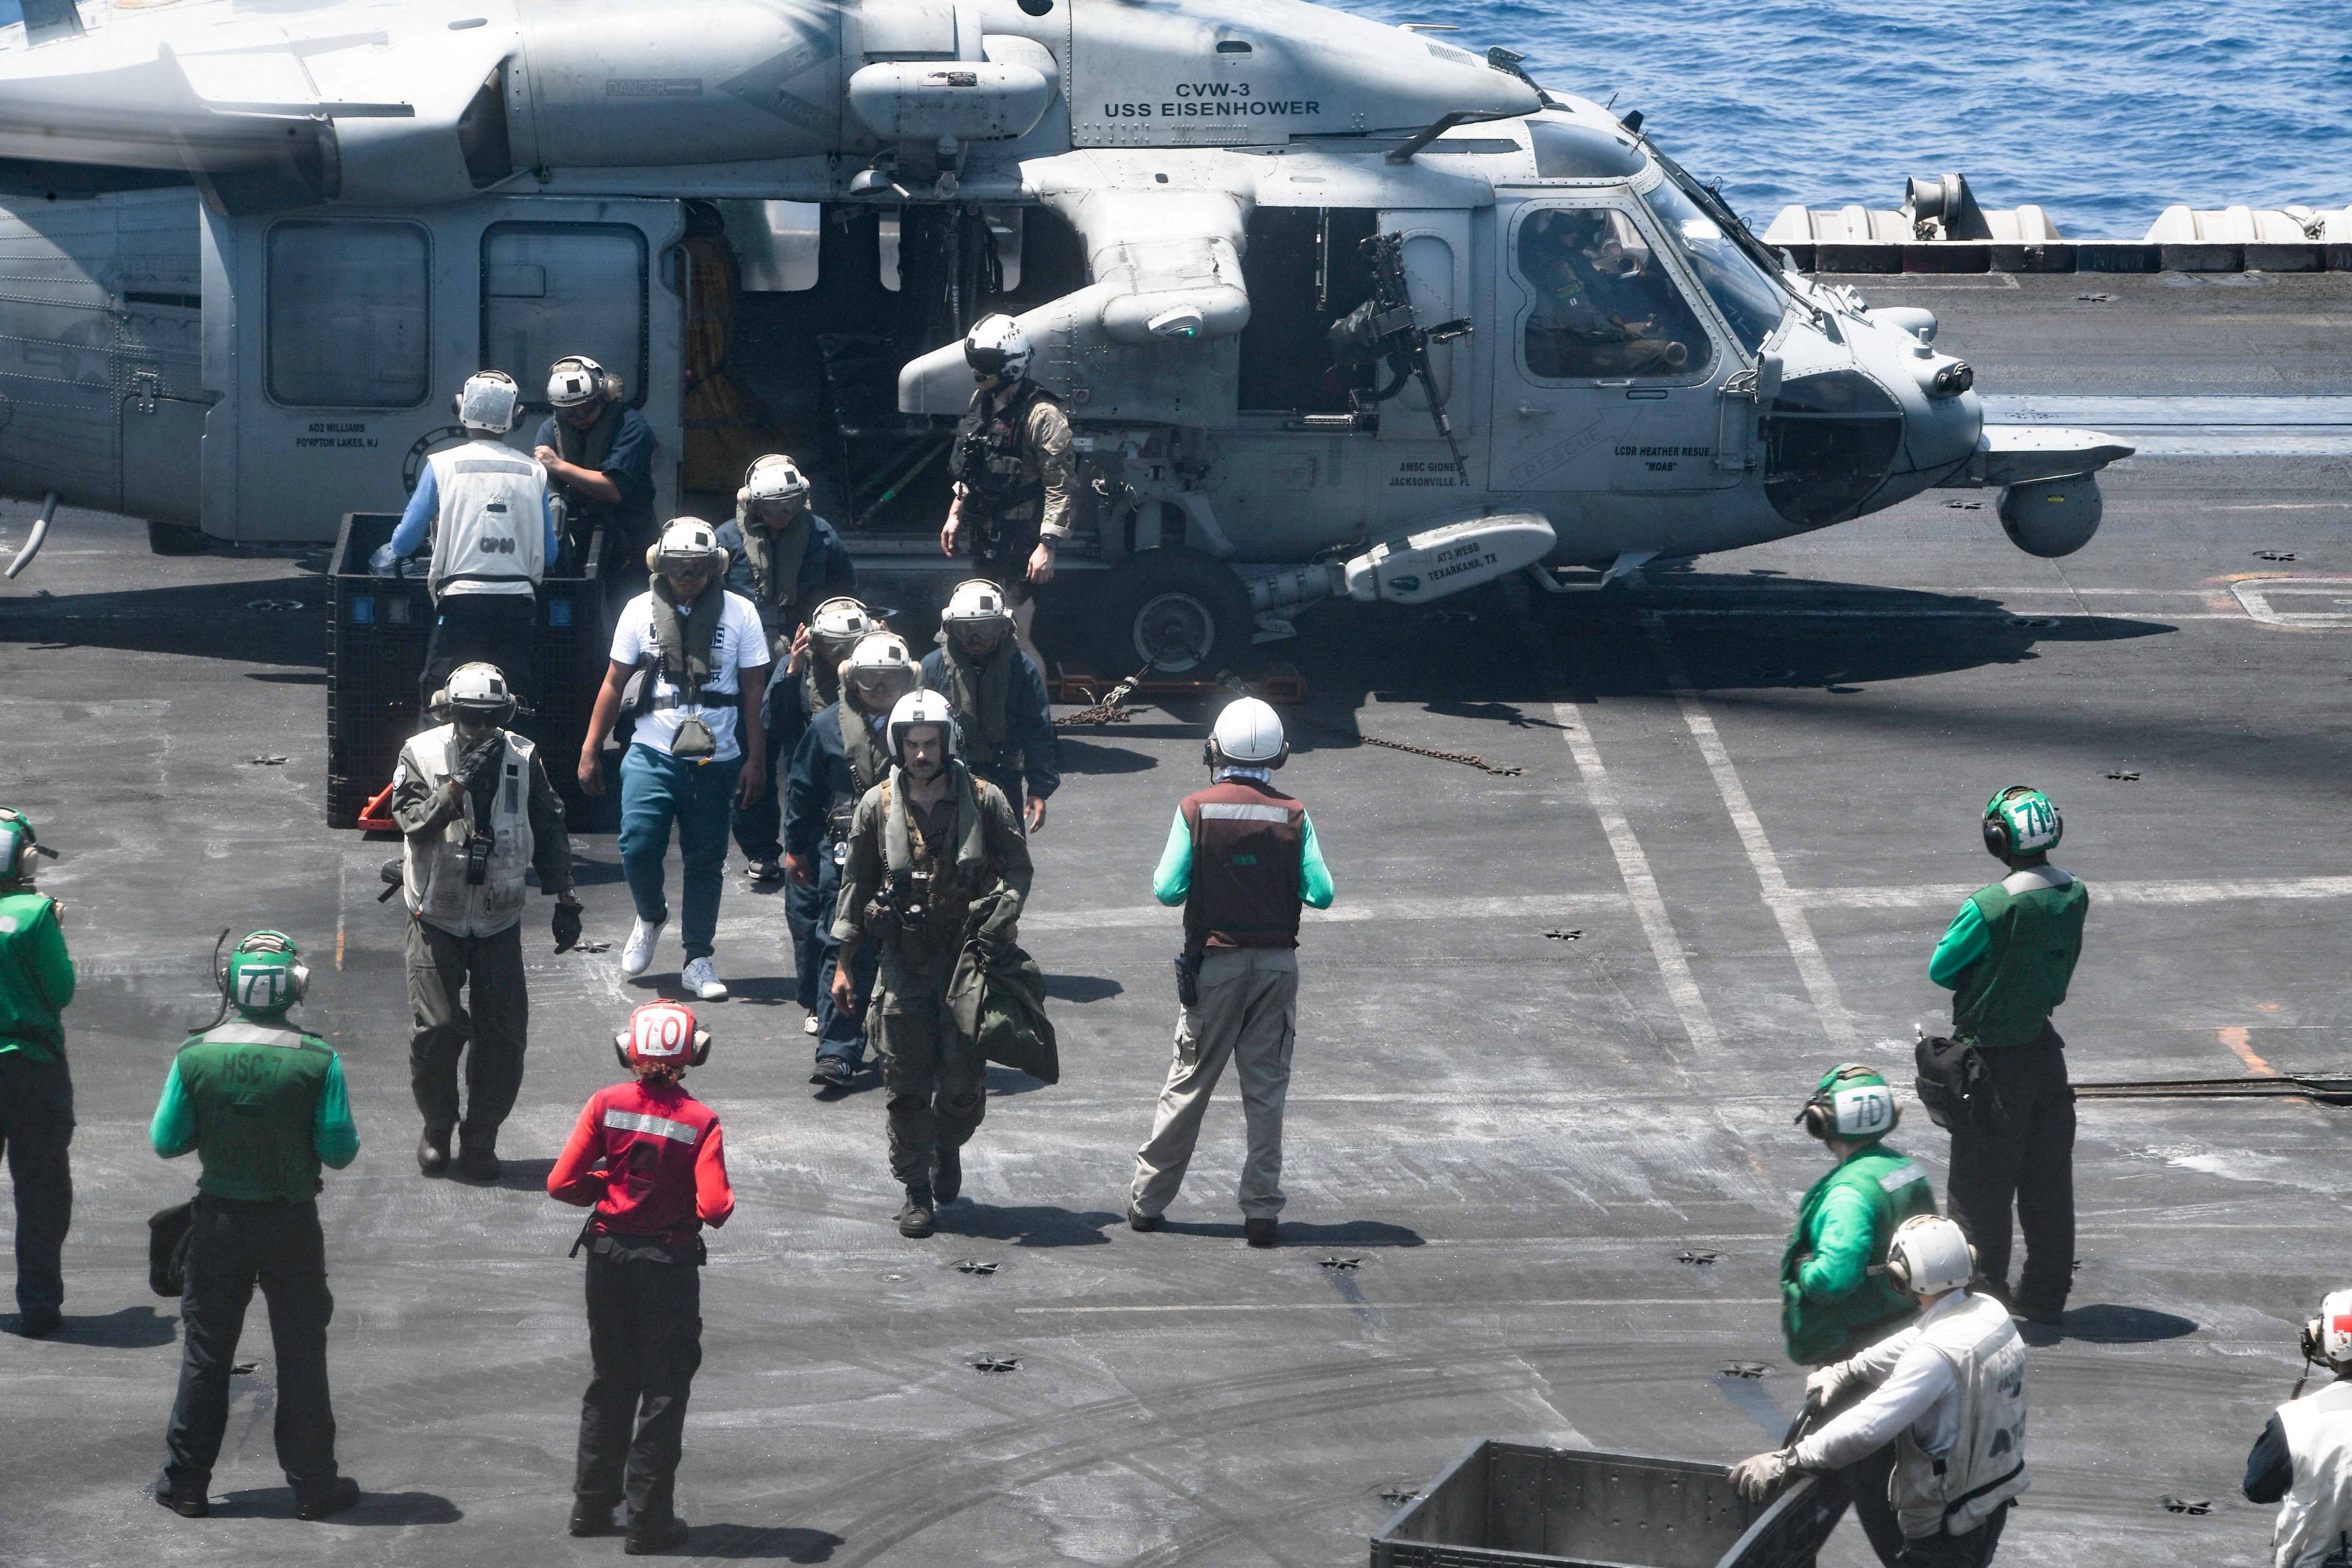 US crew from the Dwight D. Eisenhower Carrier Strike Group assist sailors rescued from the M/V Tutor. Photo: US Navy via Reuters 